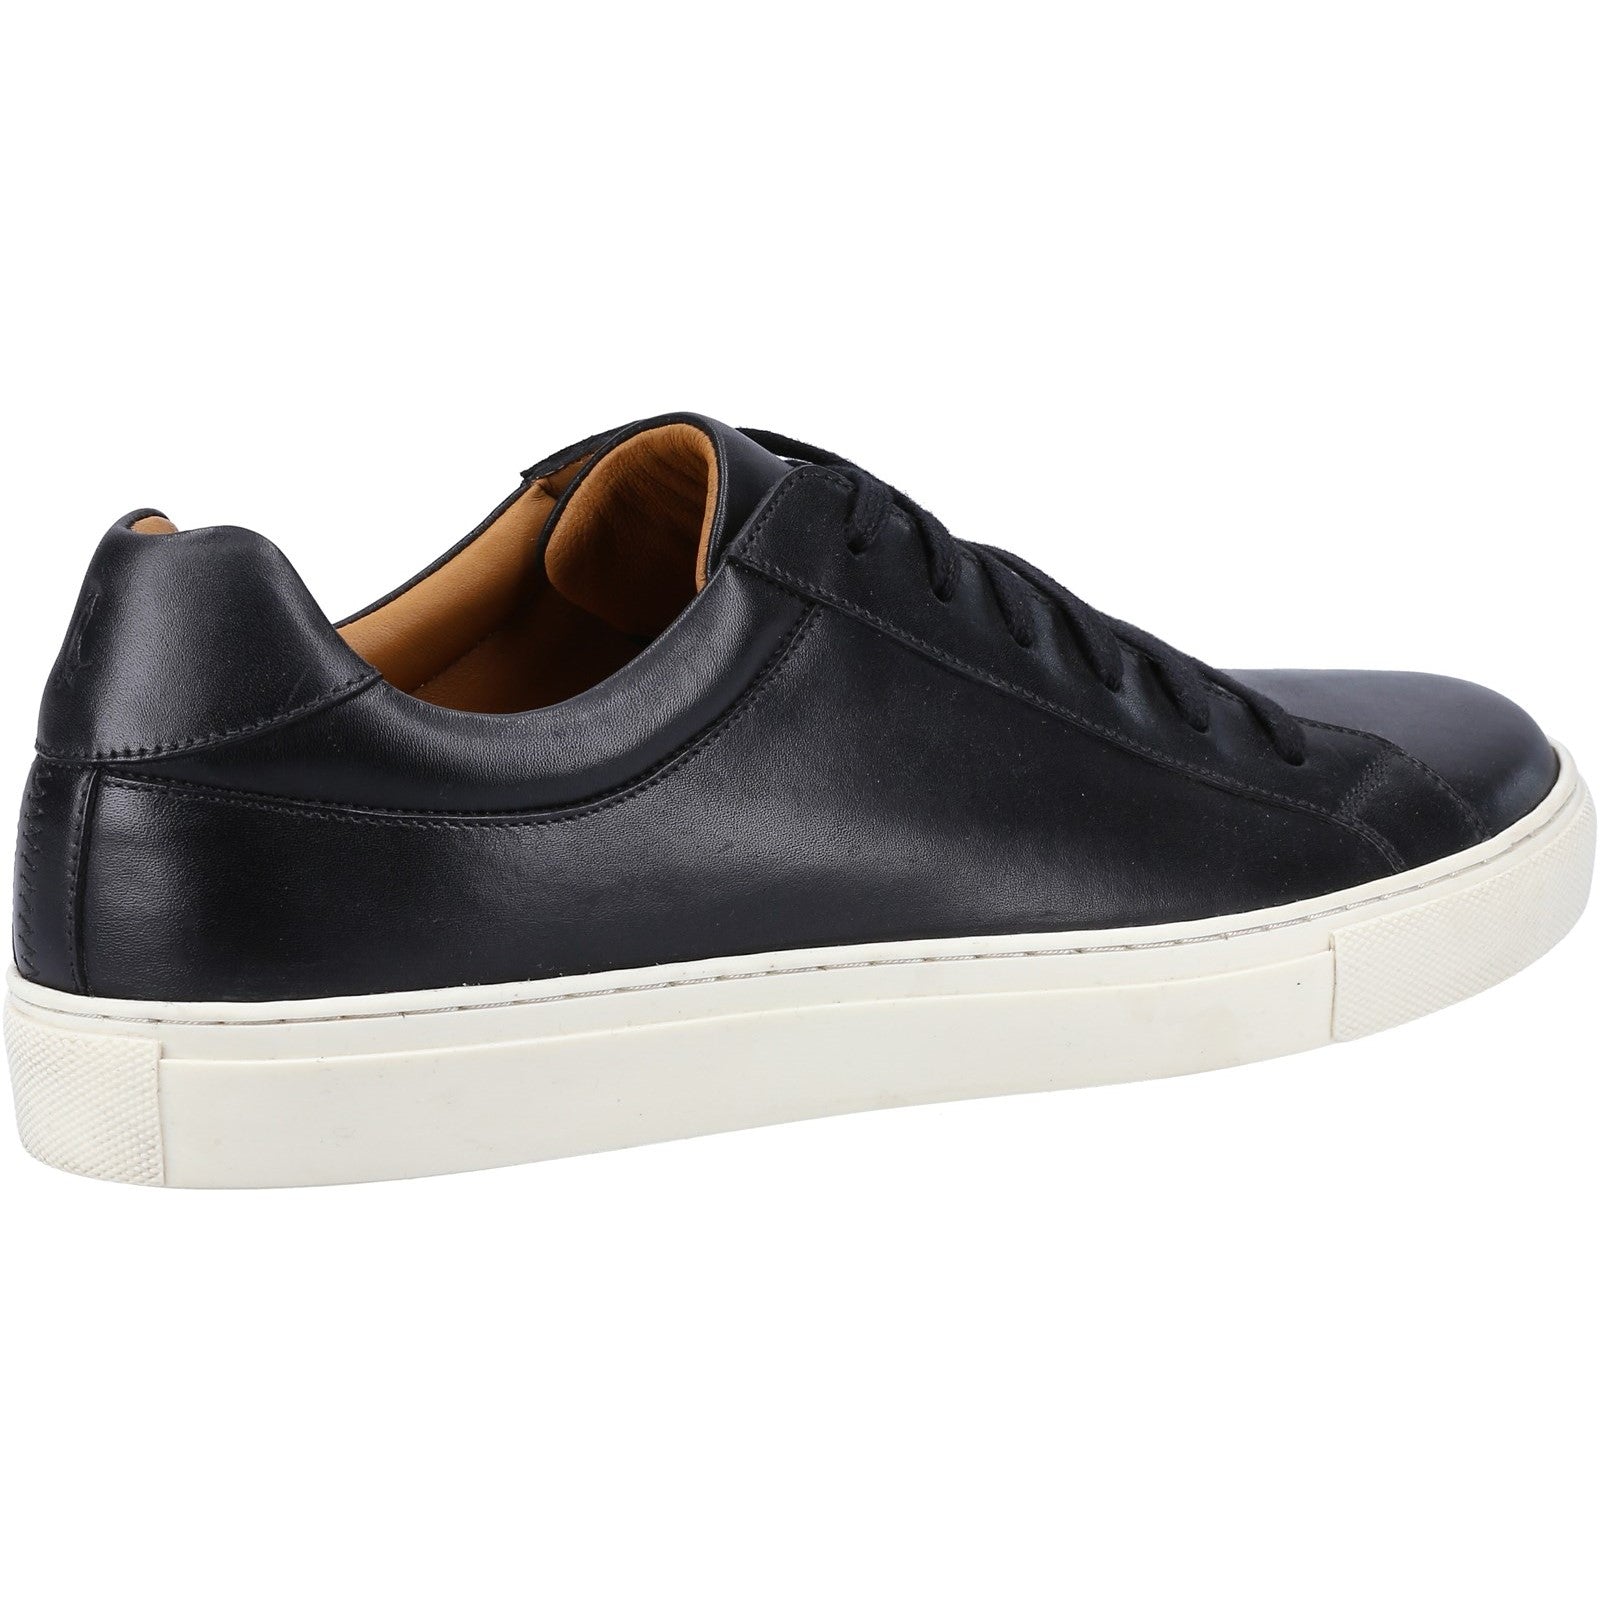 Hush Puppies Mens Colton Leather Trainers - Black